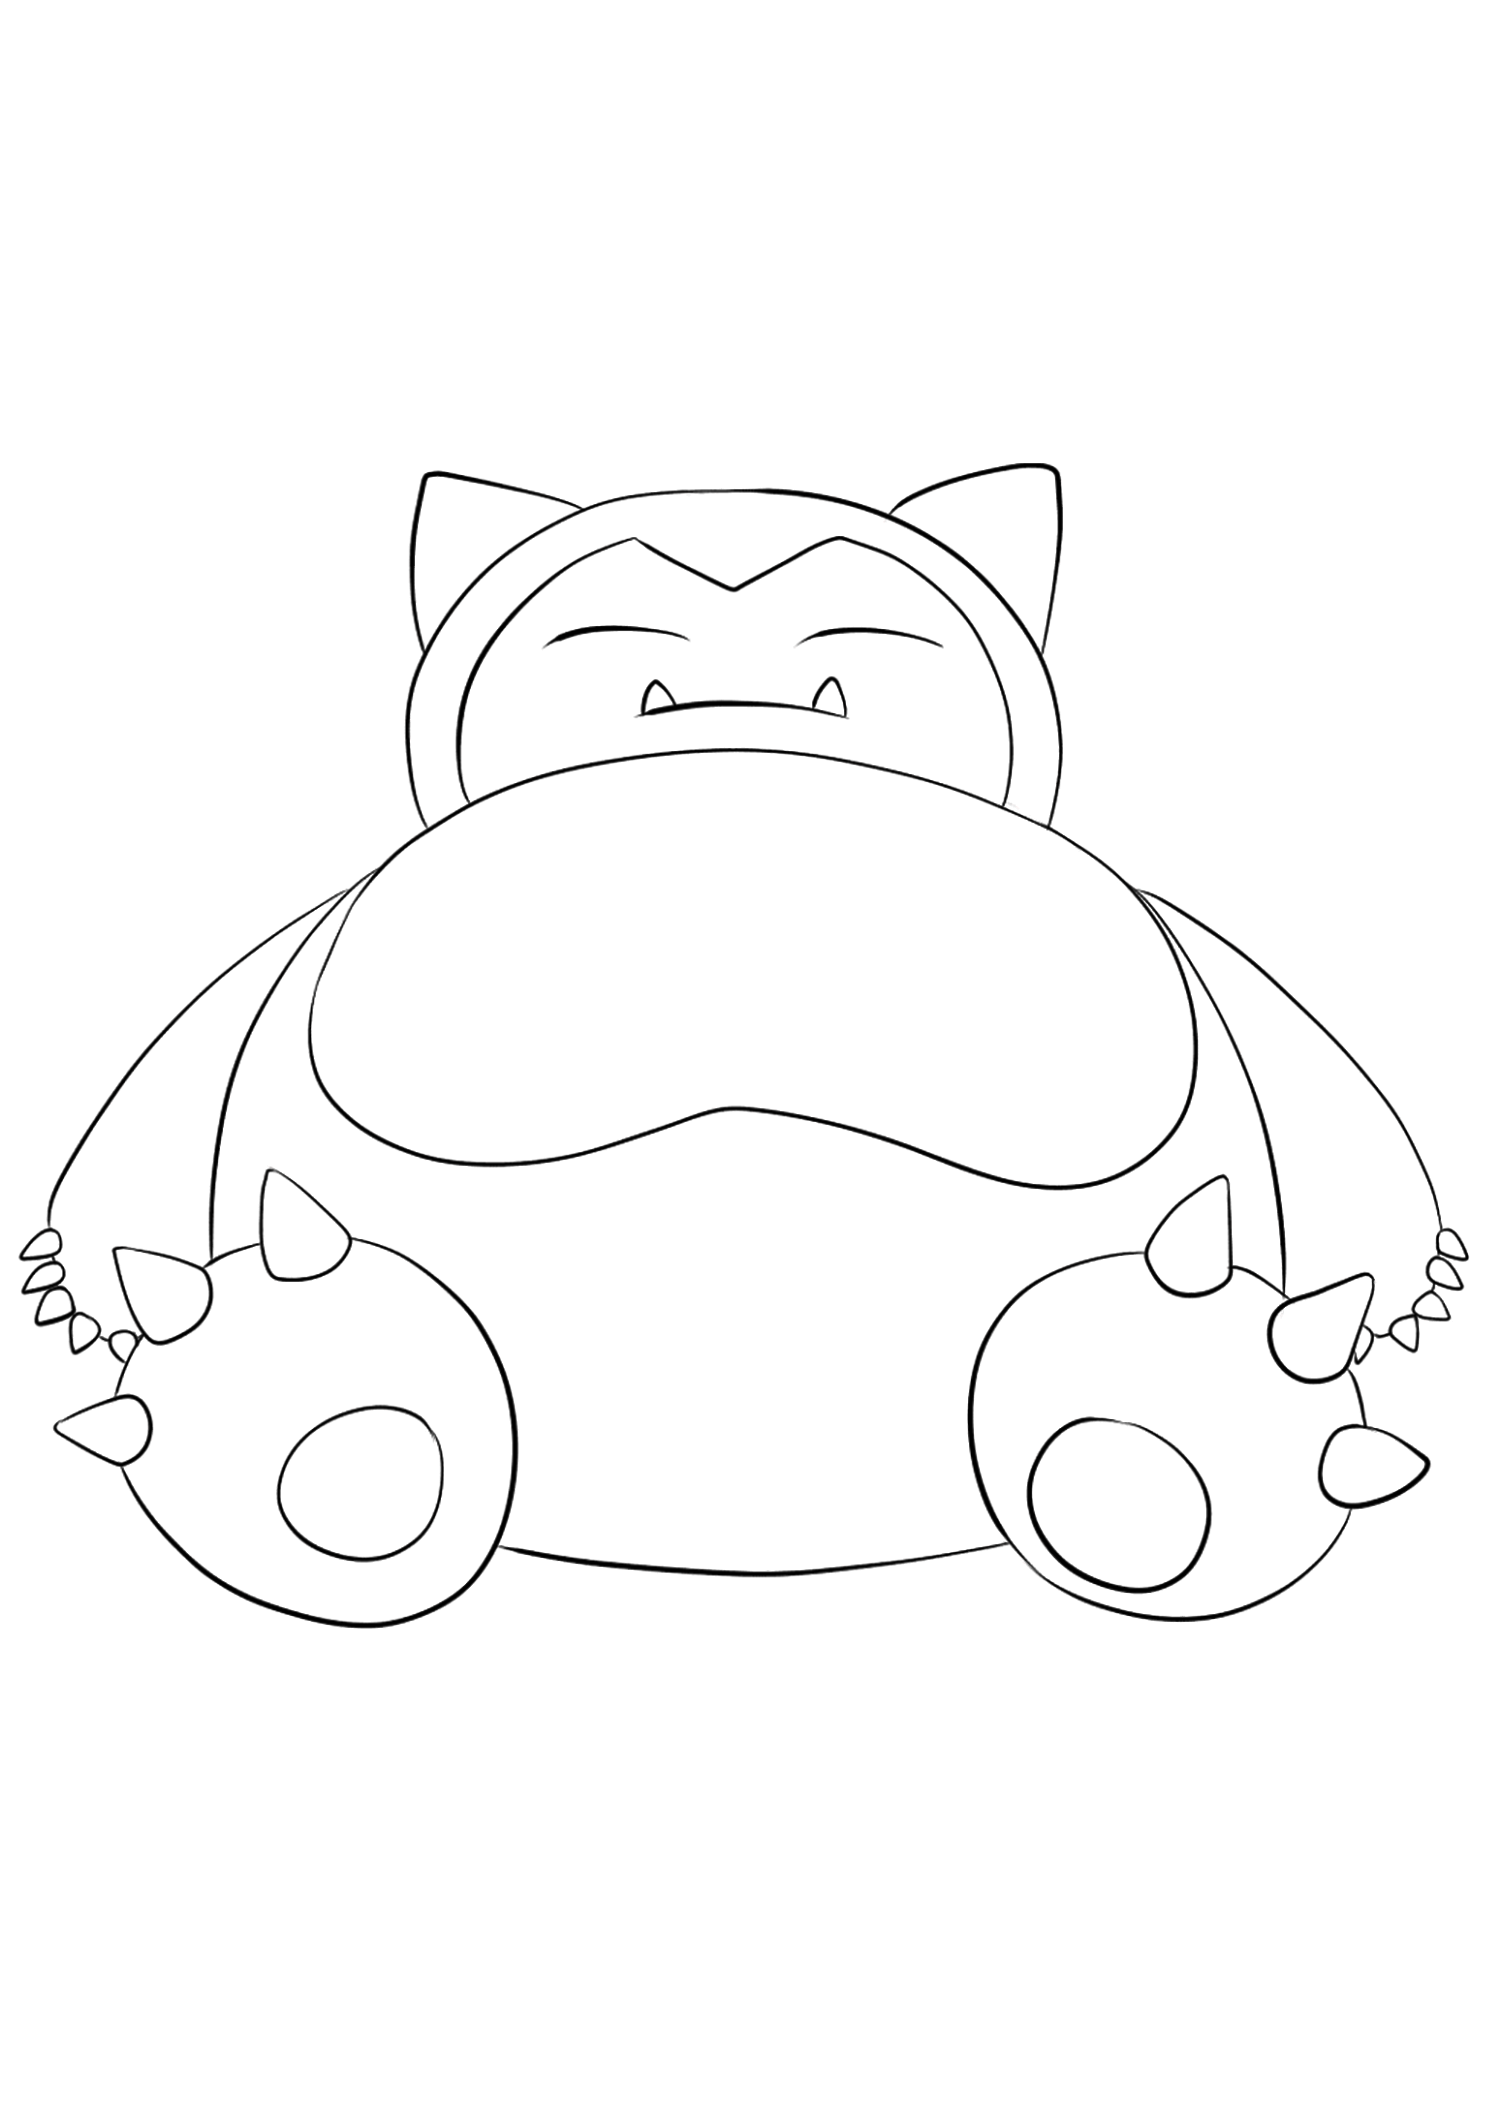 snorlax-coloring-pages-coloring-home